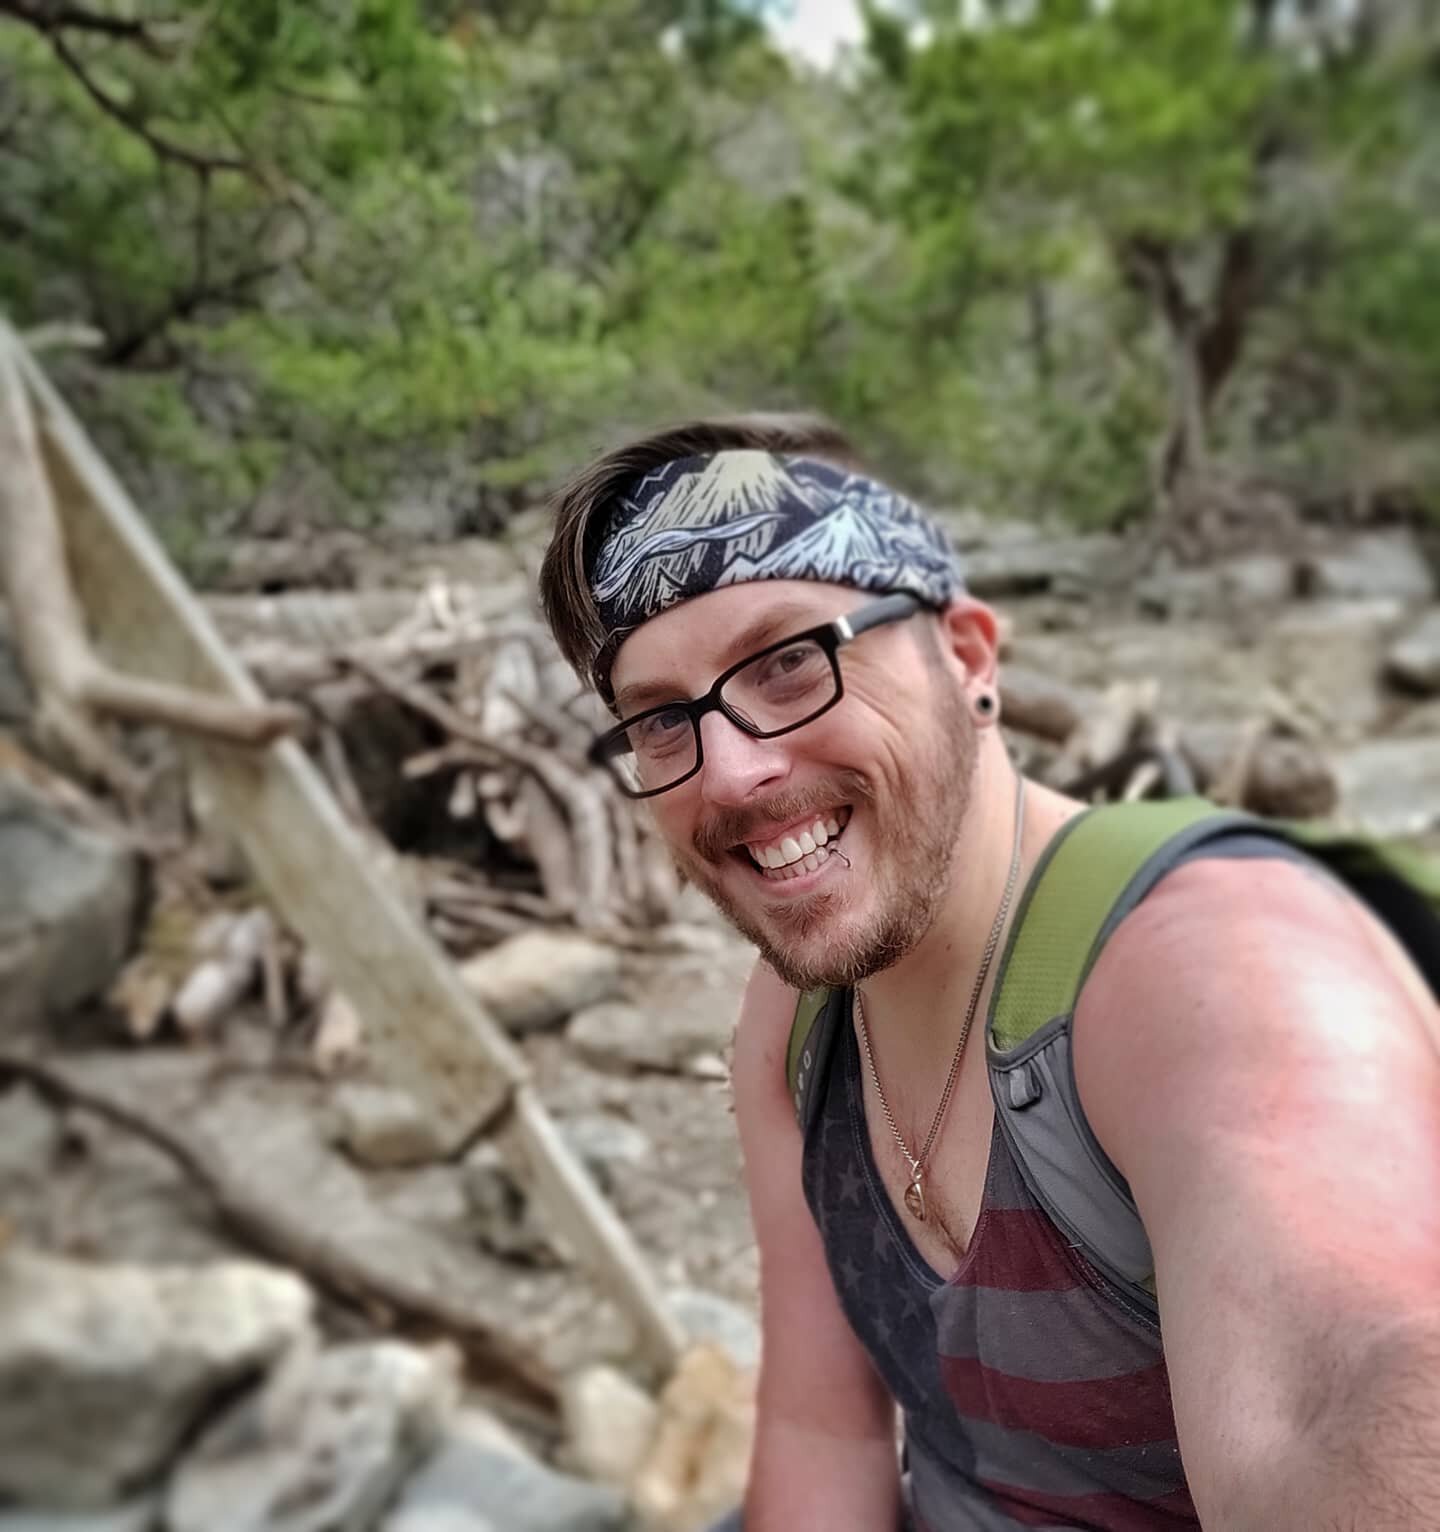 Jumping back into hiking now that the weather is nice in Austin. Trying to do 2 miles 3x a week to build up my stamina &amp; to not overdo it.

Anyone else typically go too hard when they're excited about something and inevitably injure themselves or